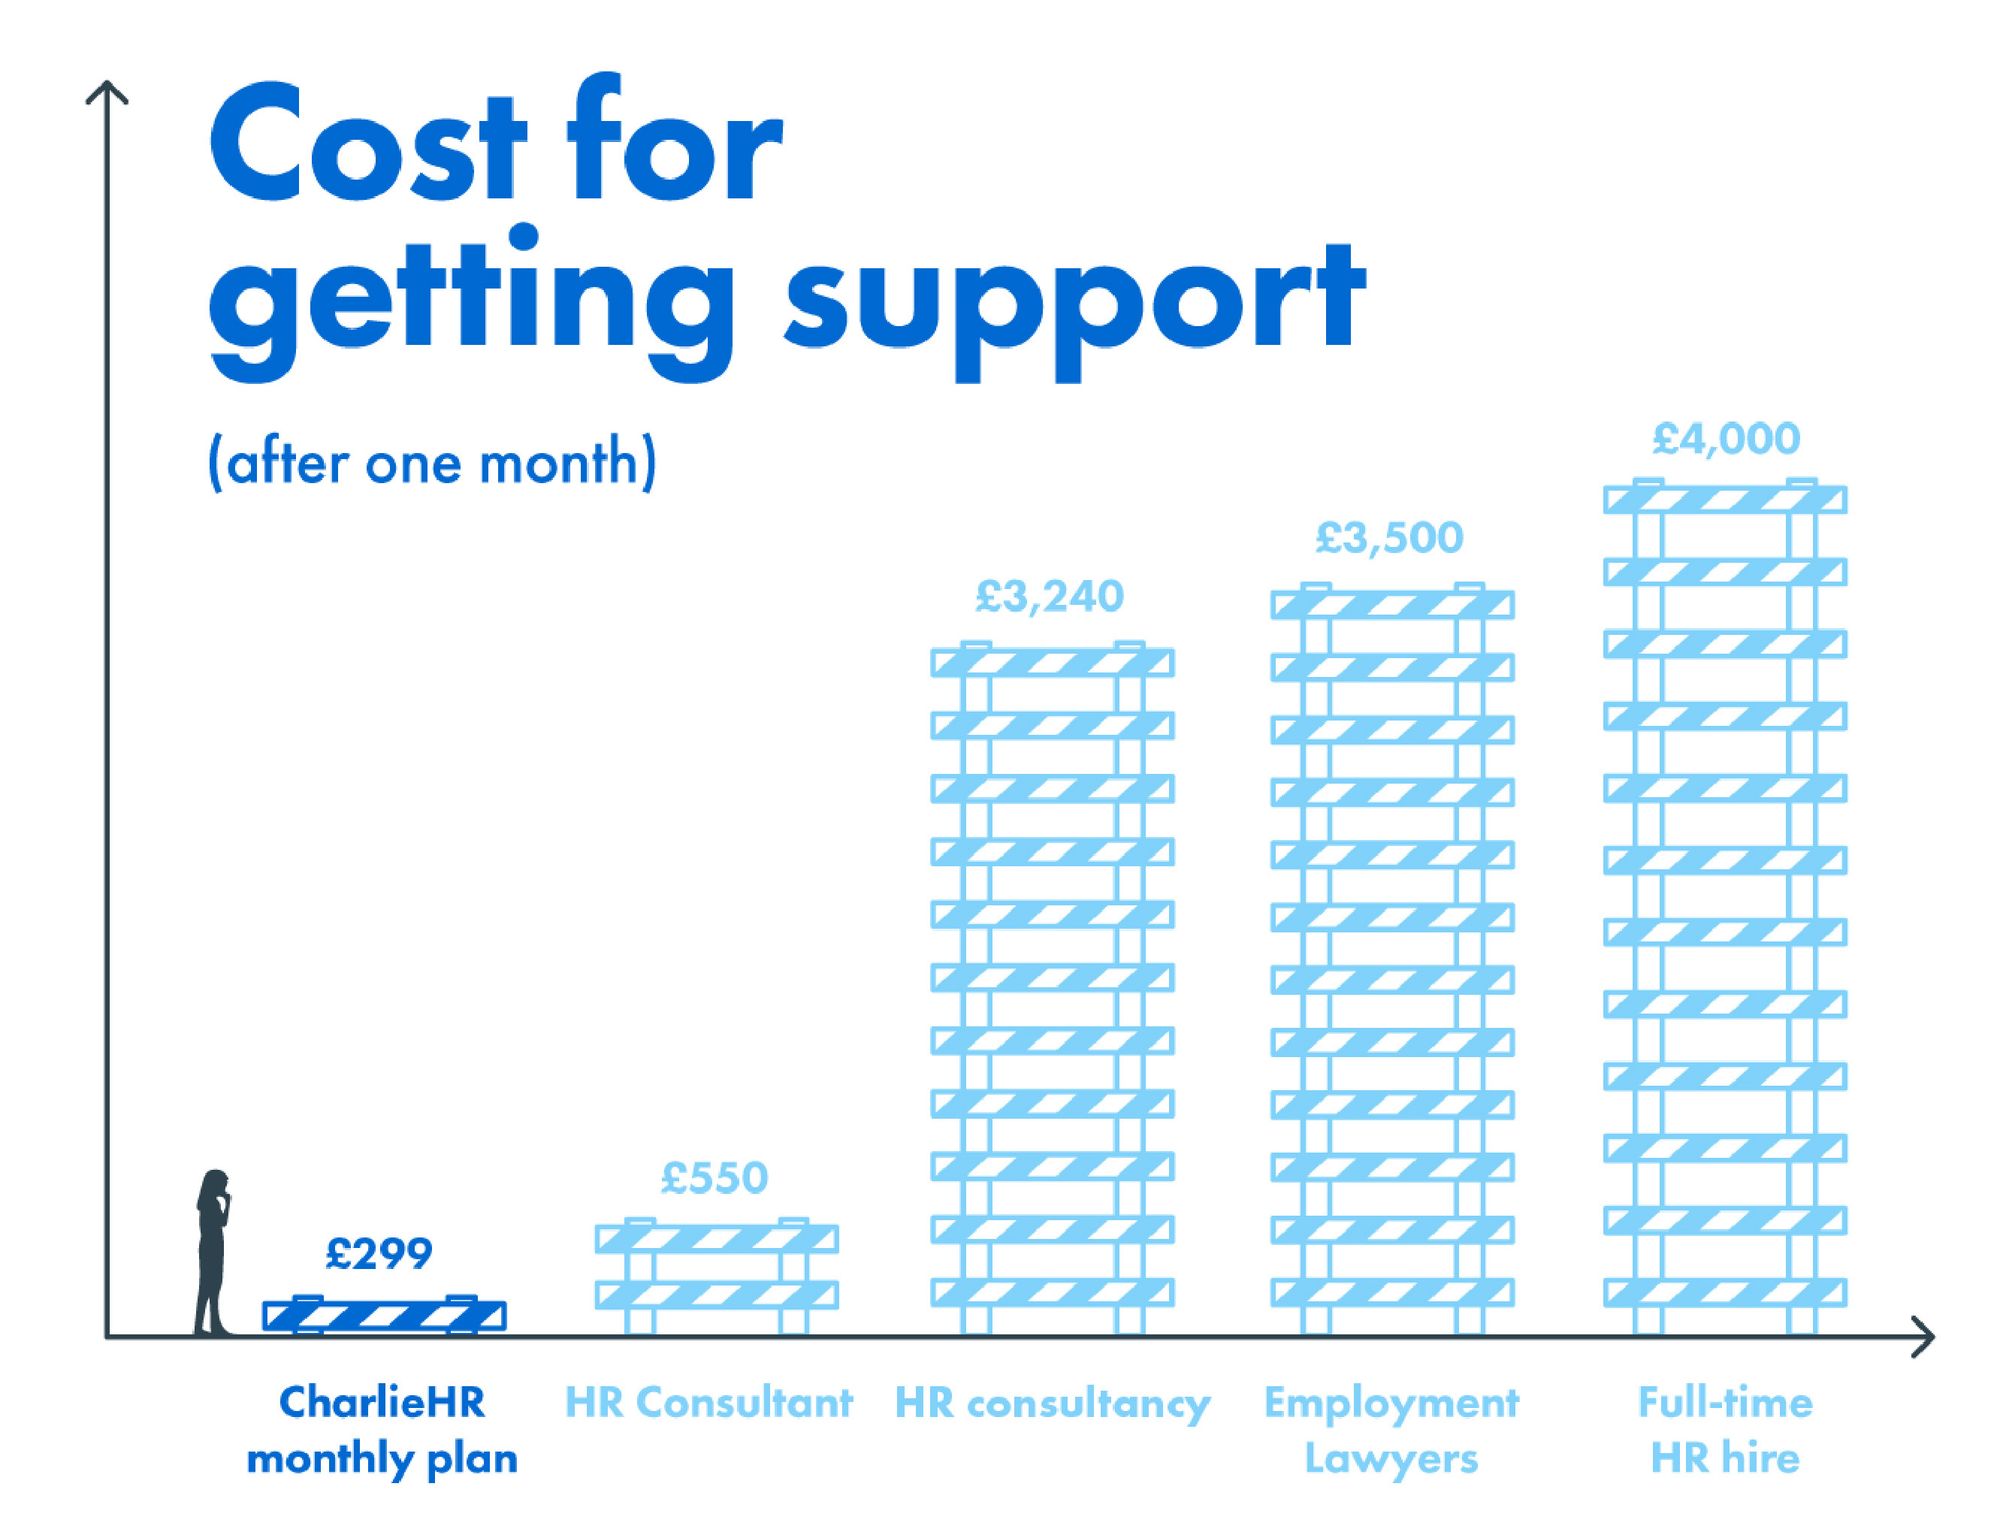 Cost of CharlieHR in comparison to the rest of the market - £299 compared to much more for others